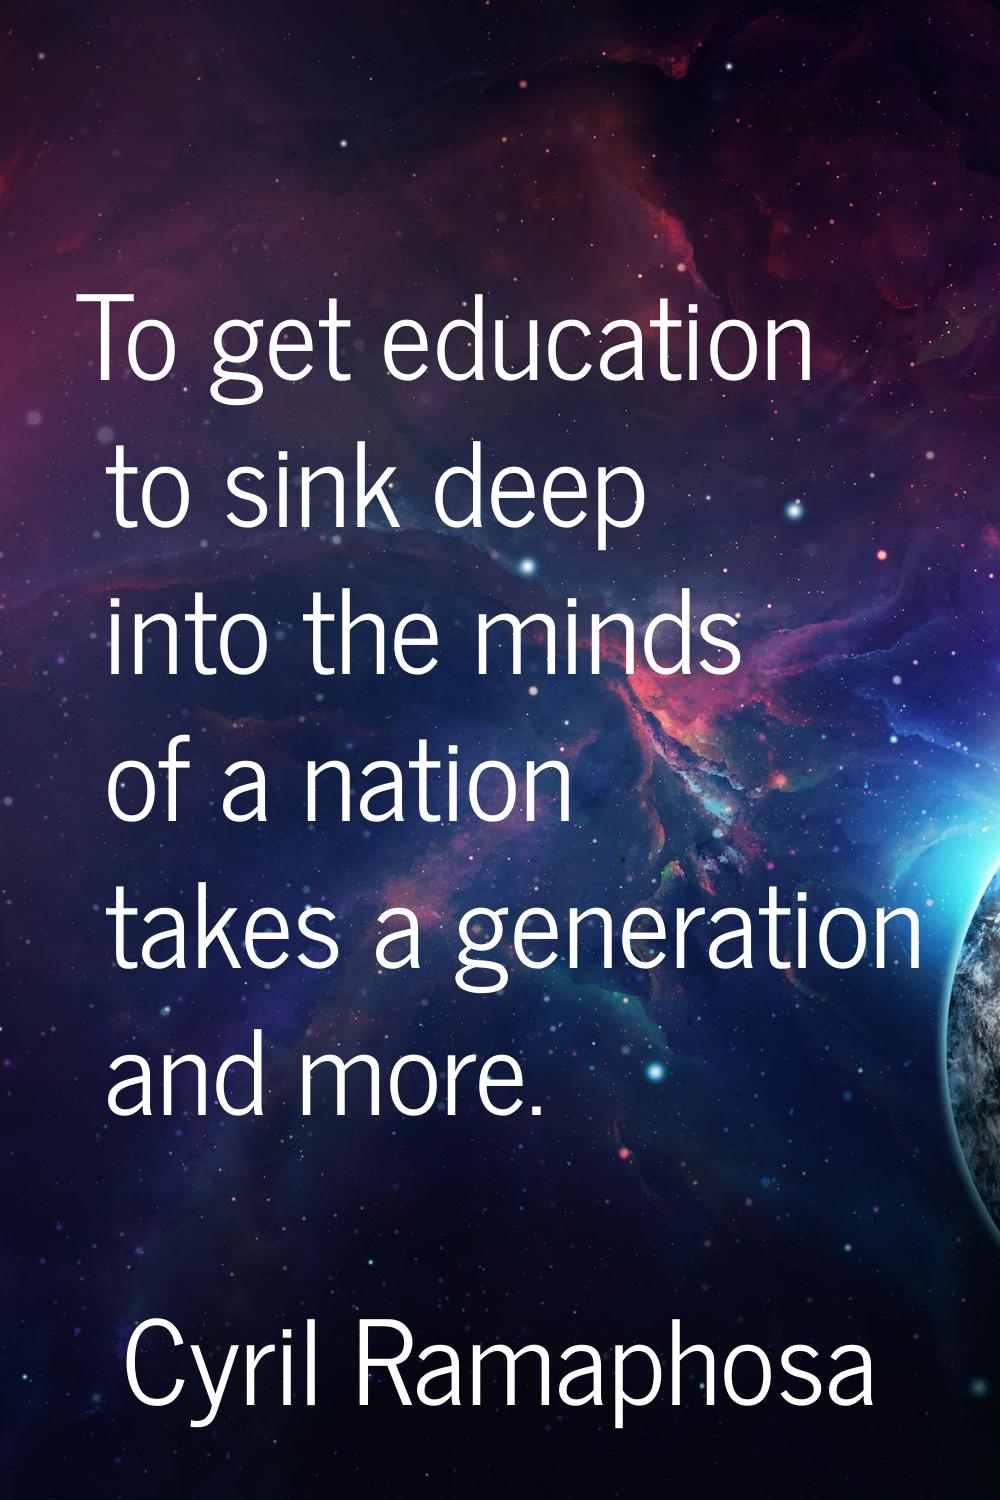 To get education to sink deep into the minds of a nation takes a generation and more.